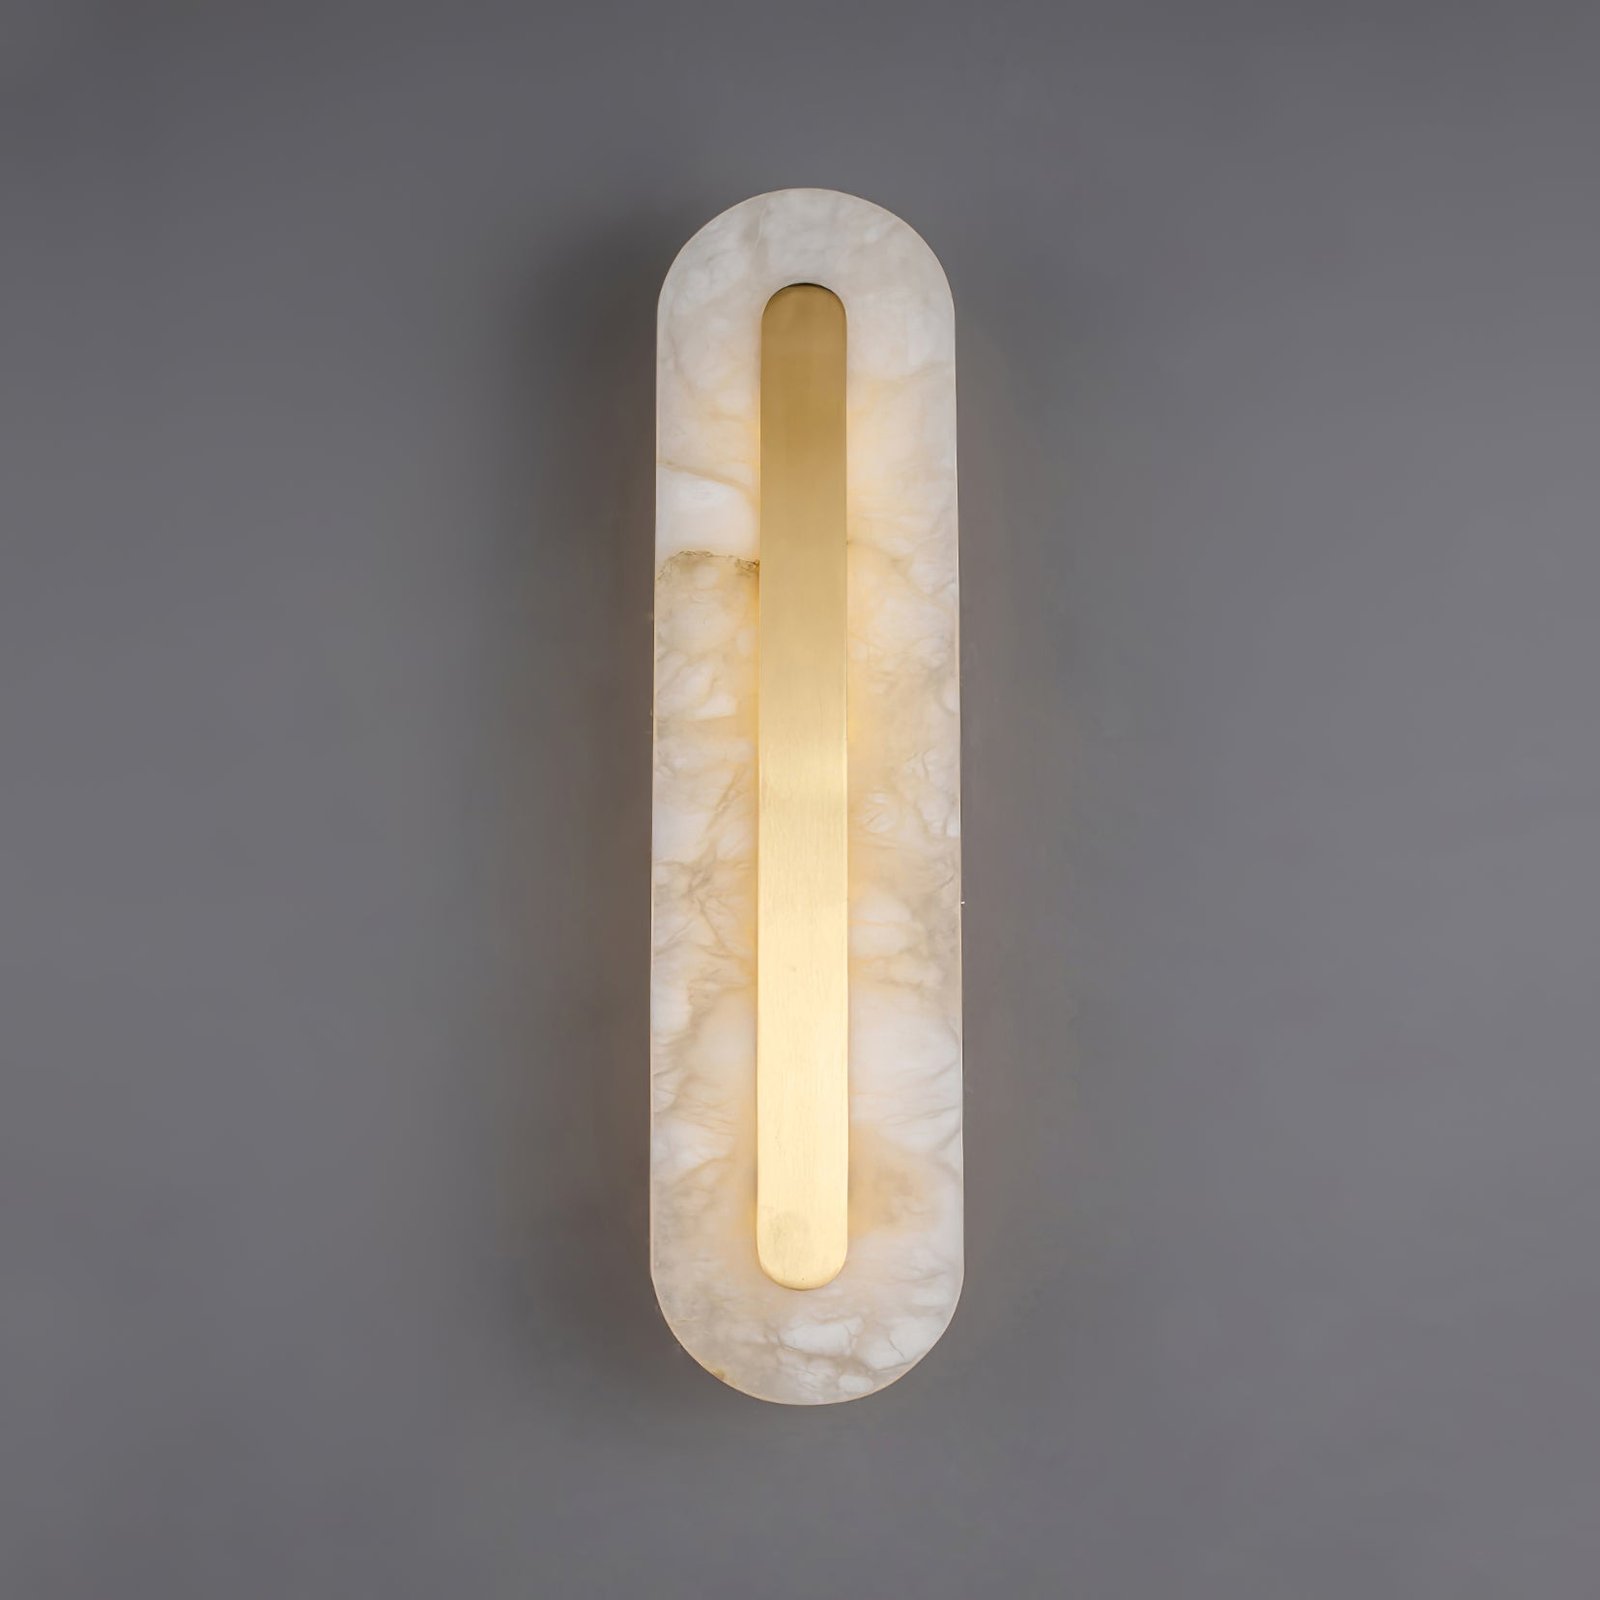 Marble Round Wall Light in White and Brass, Cool Light, Diameter 4.3 inches and Height 13.8 inches (11cm x 35cm)